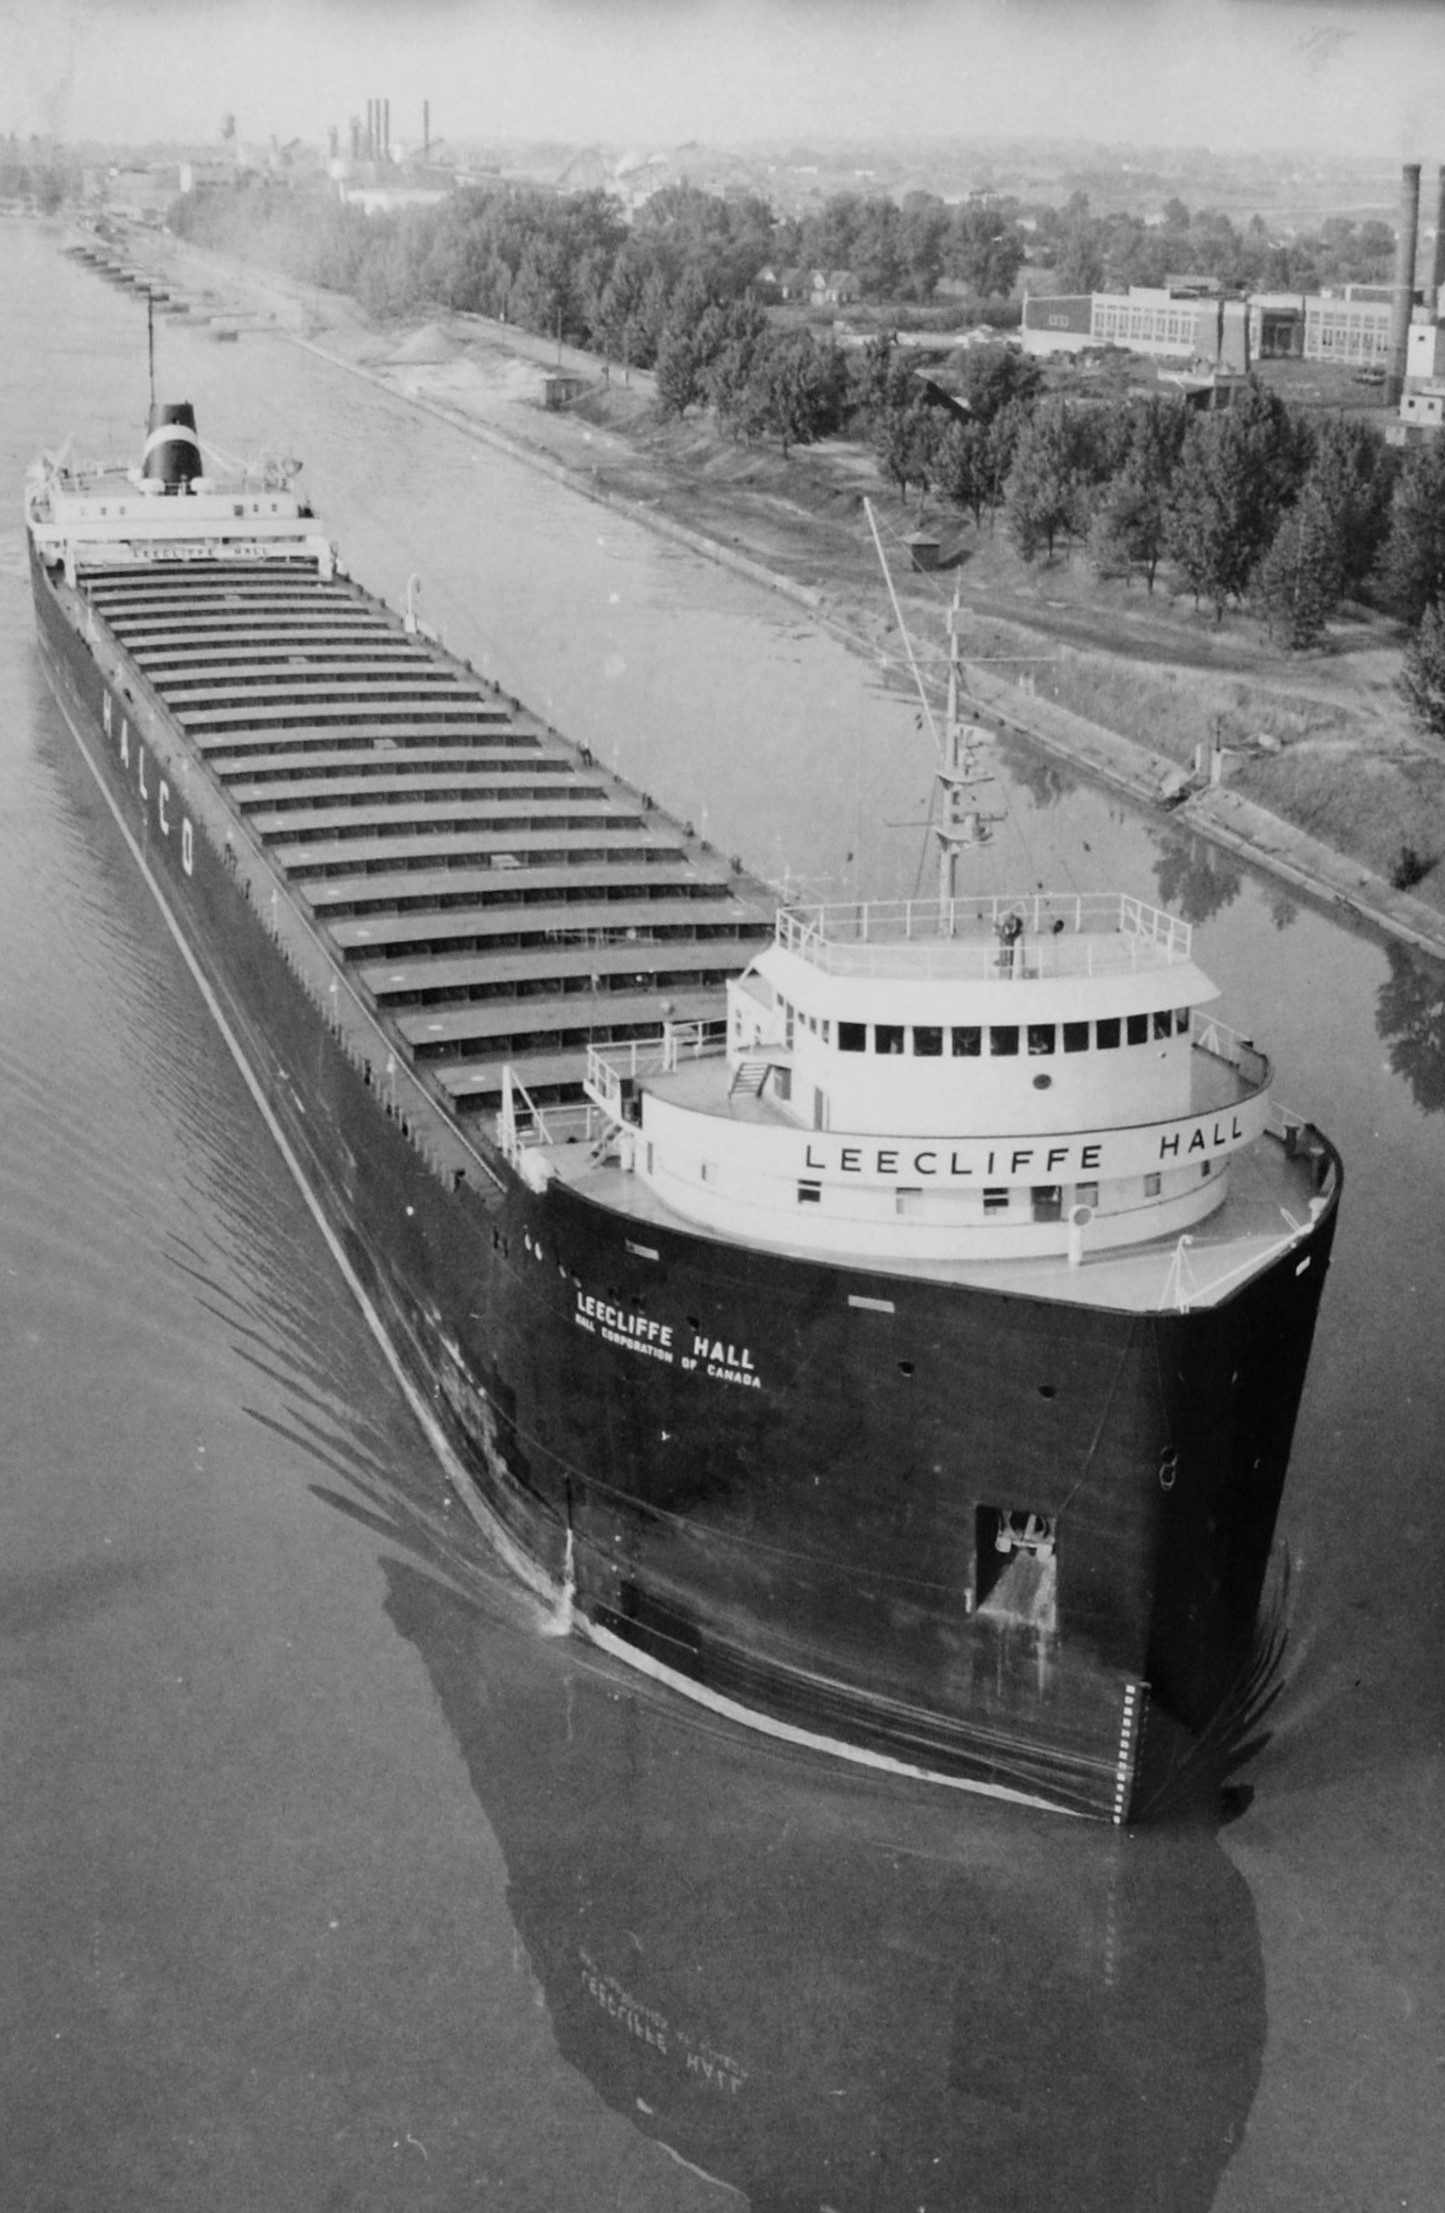 Leecliffe Hall (overhead view) in the Welland Canal by Robert Walton